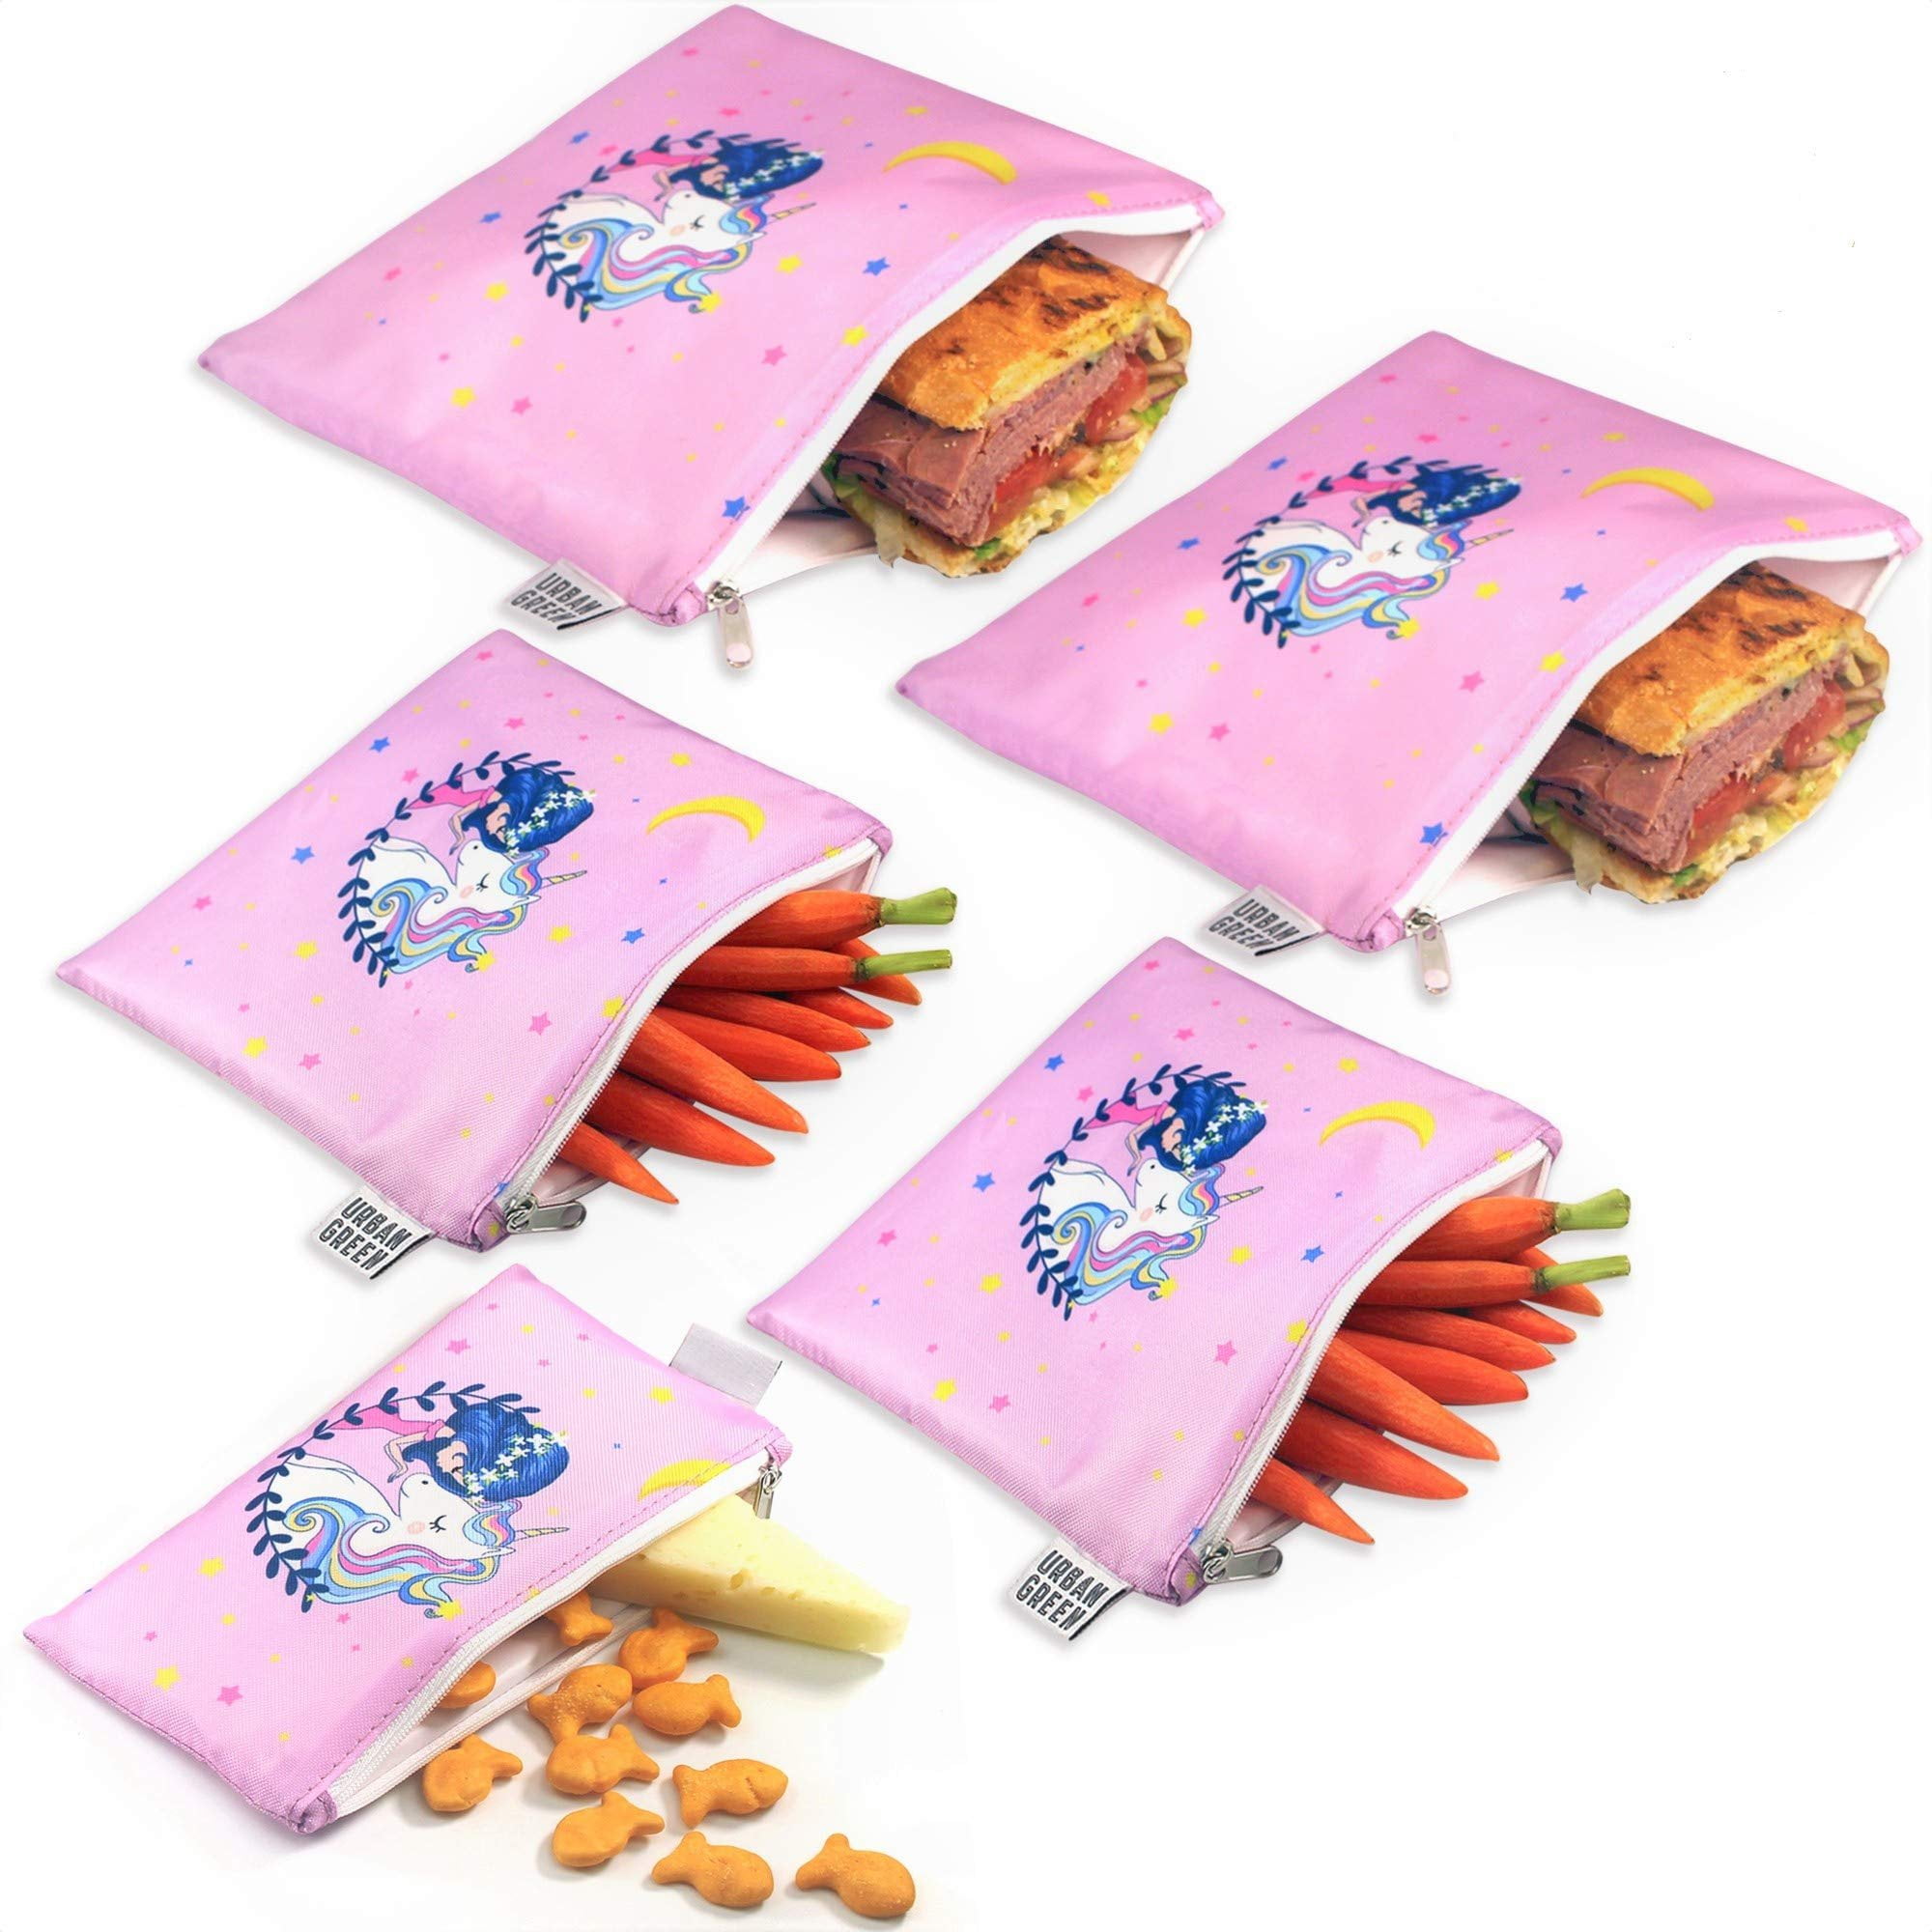 Reusable Snack Bags Set For Kids Who Love to Camp